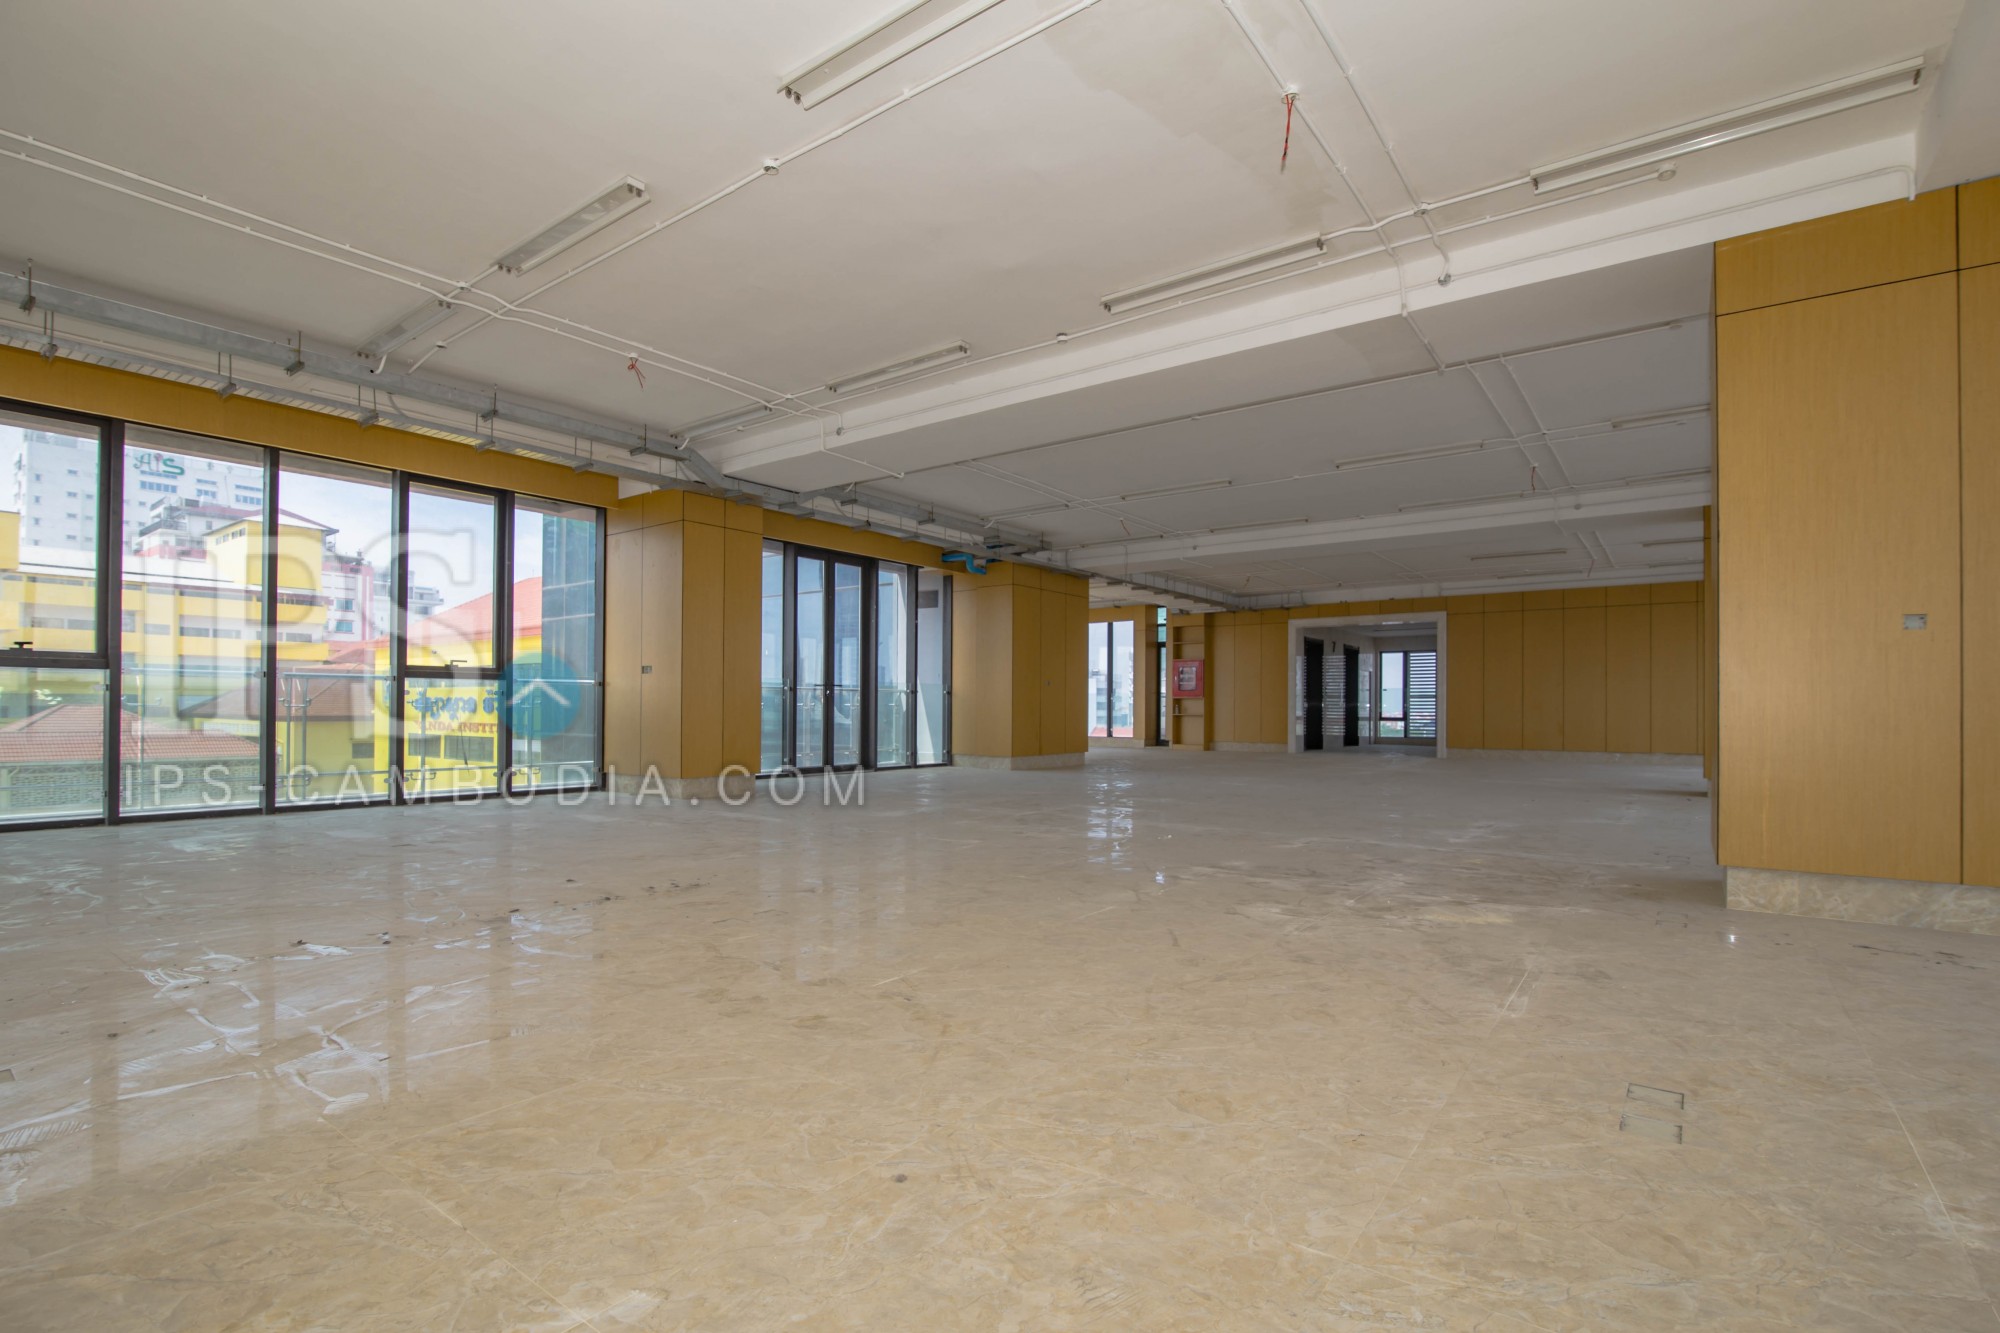 400 sq.m. Office Space For Rent - Tumnup Teuk, Phnom Penh thumbnail